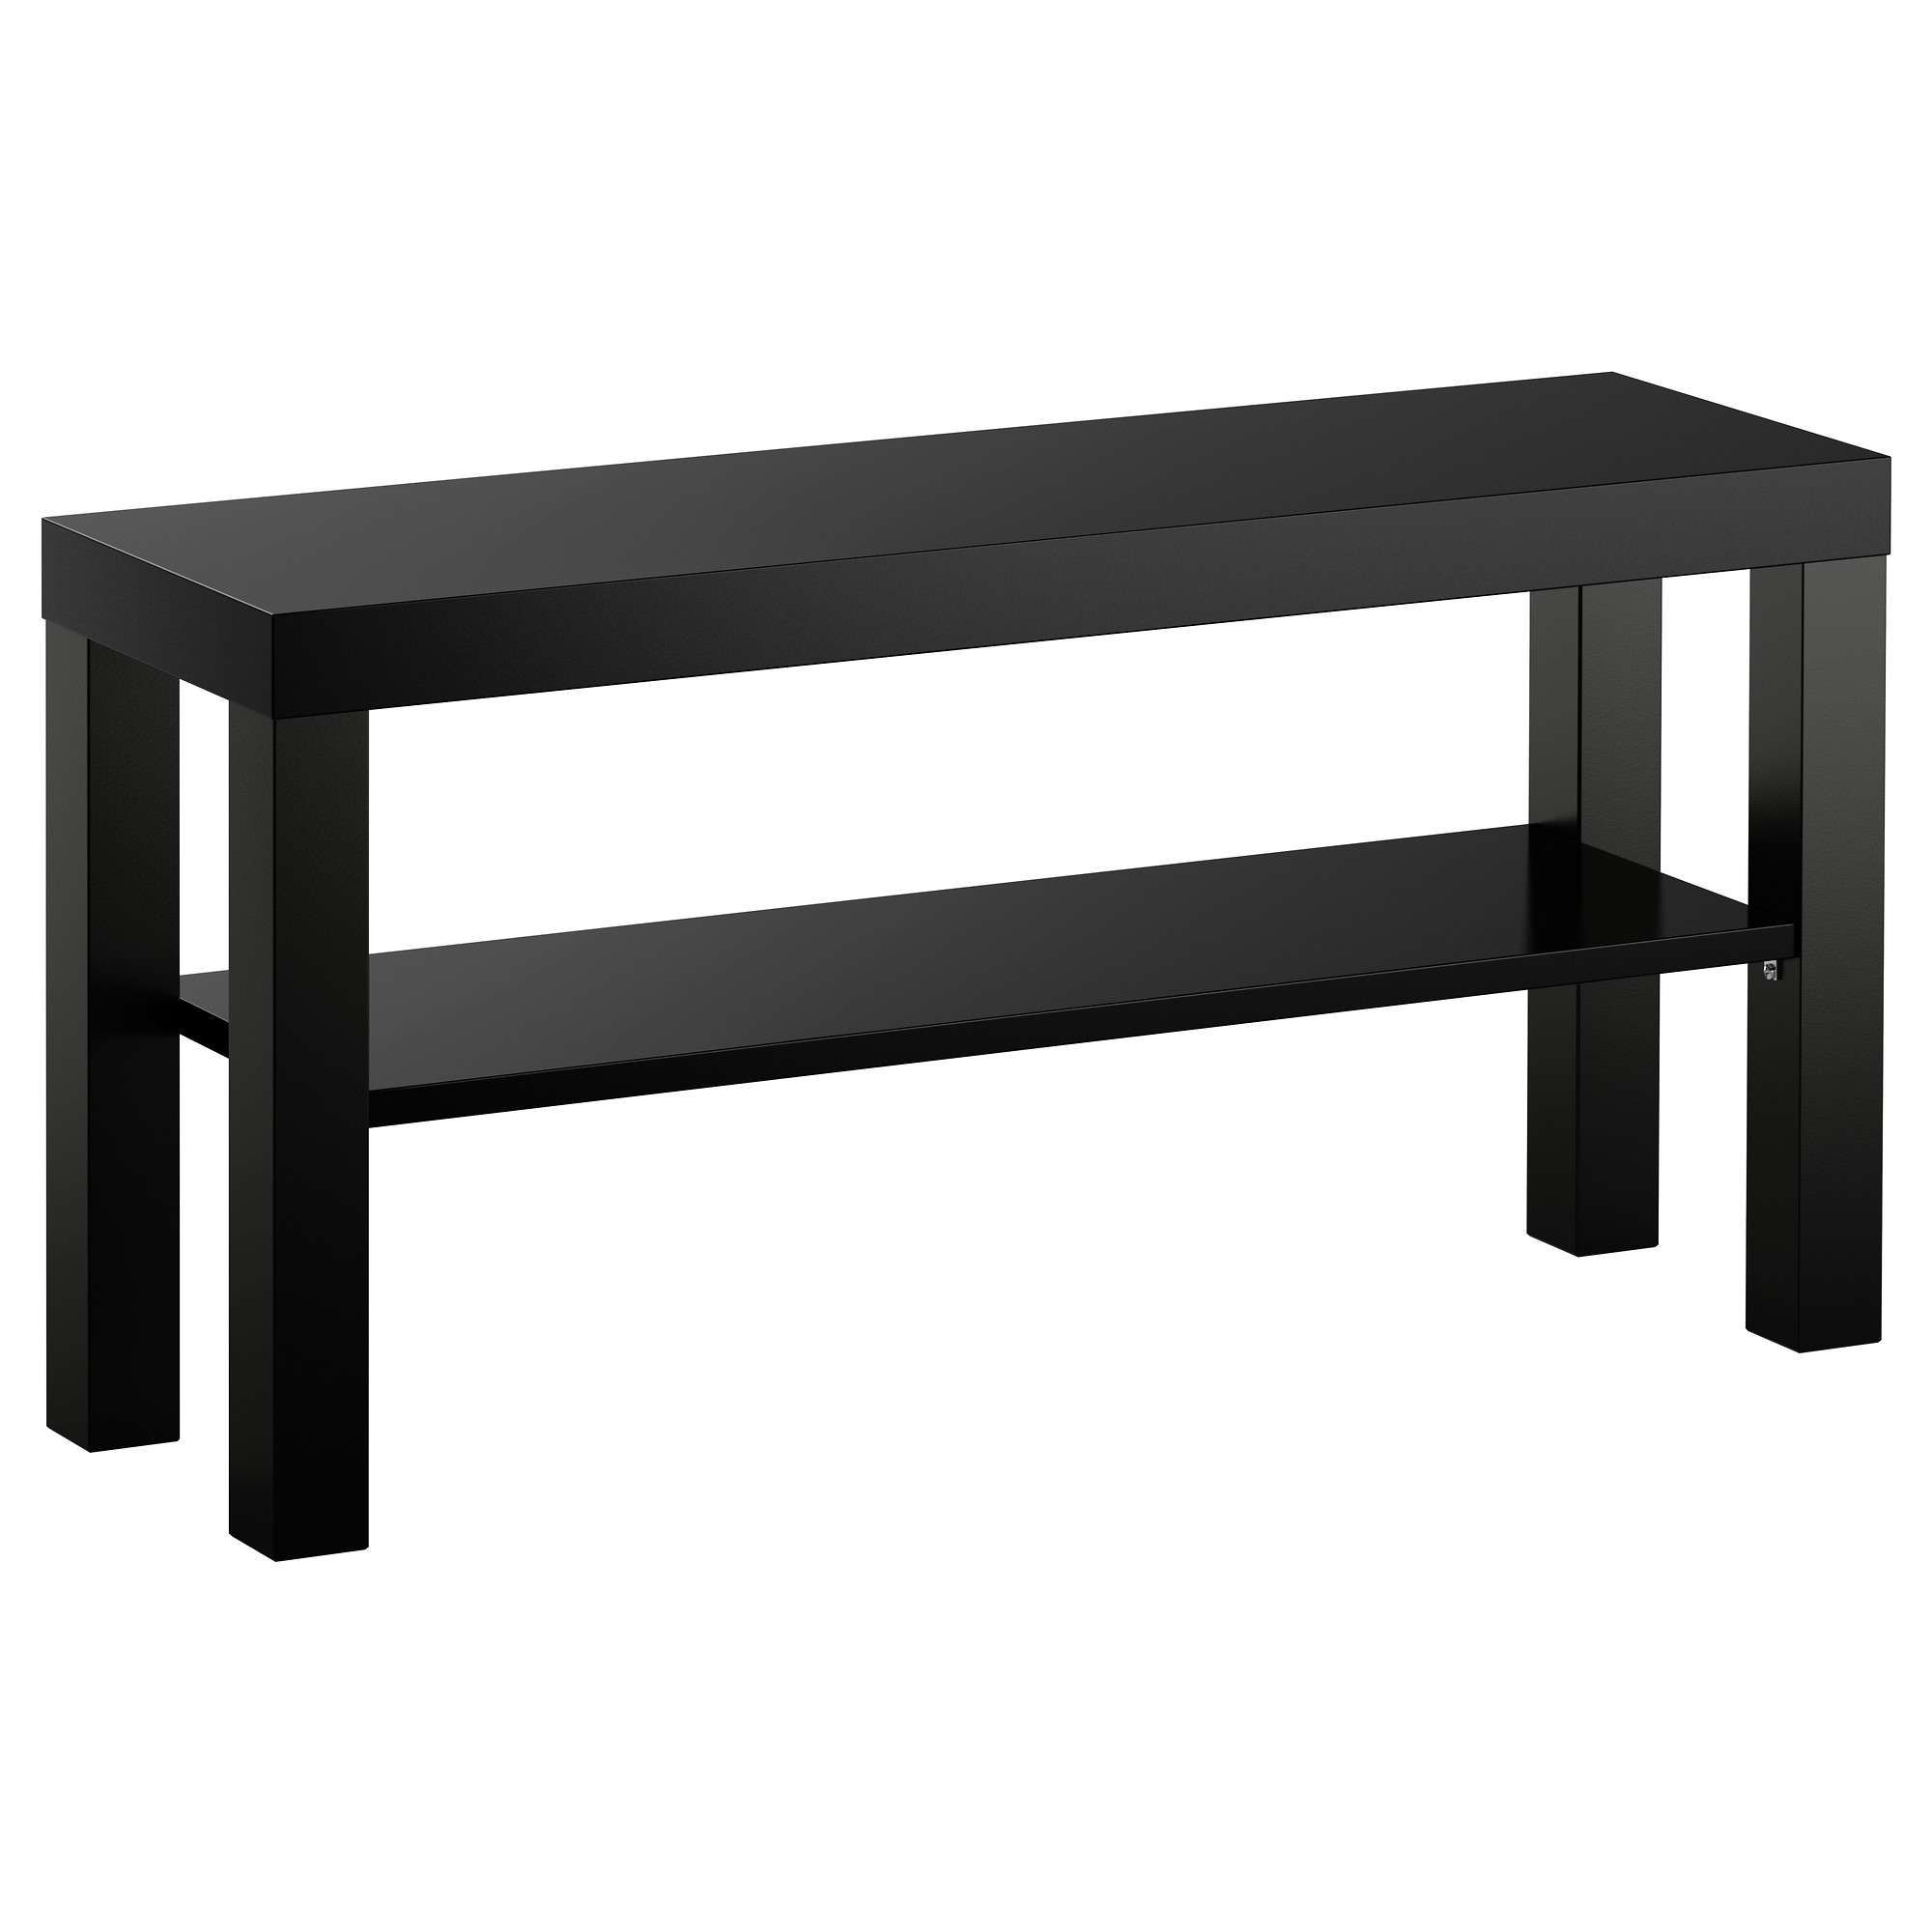 Lack Tv Bench Black 90x26 Cm – Ikea Inside Bench Tv Stands (View 12 of 15)